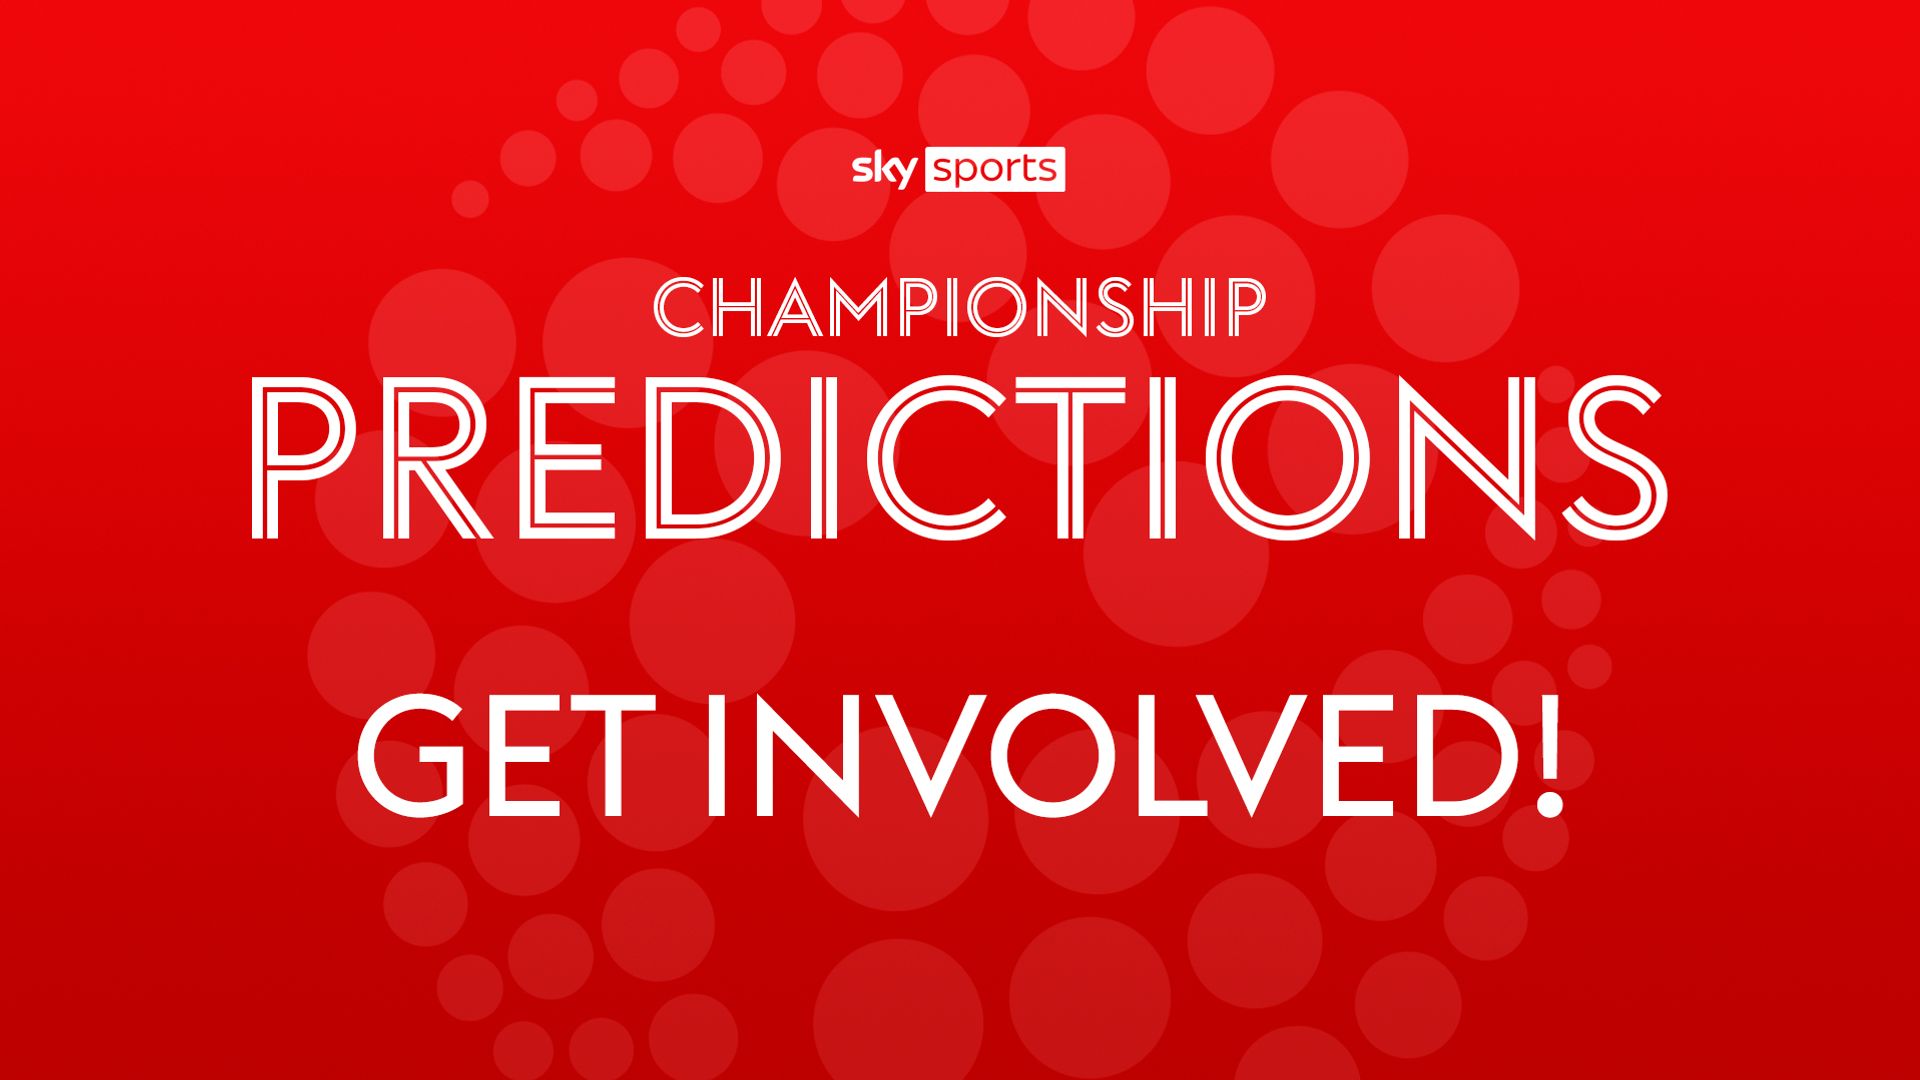 Your Championship predictions: GET INVOLVED!